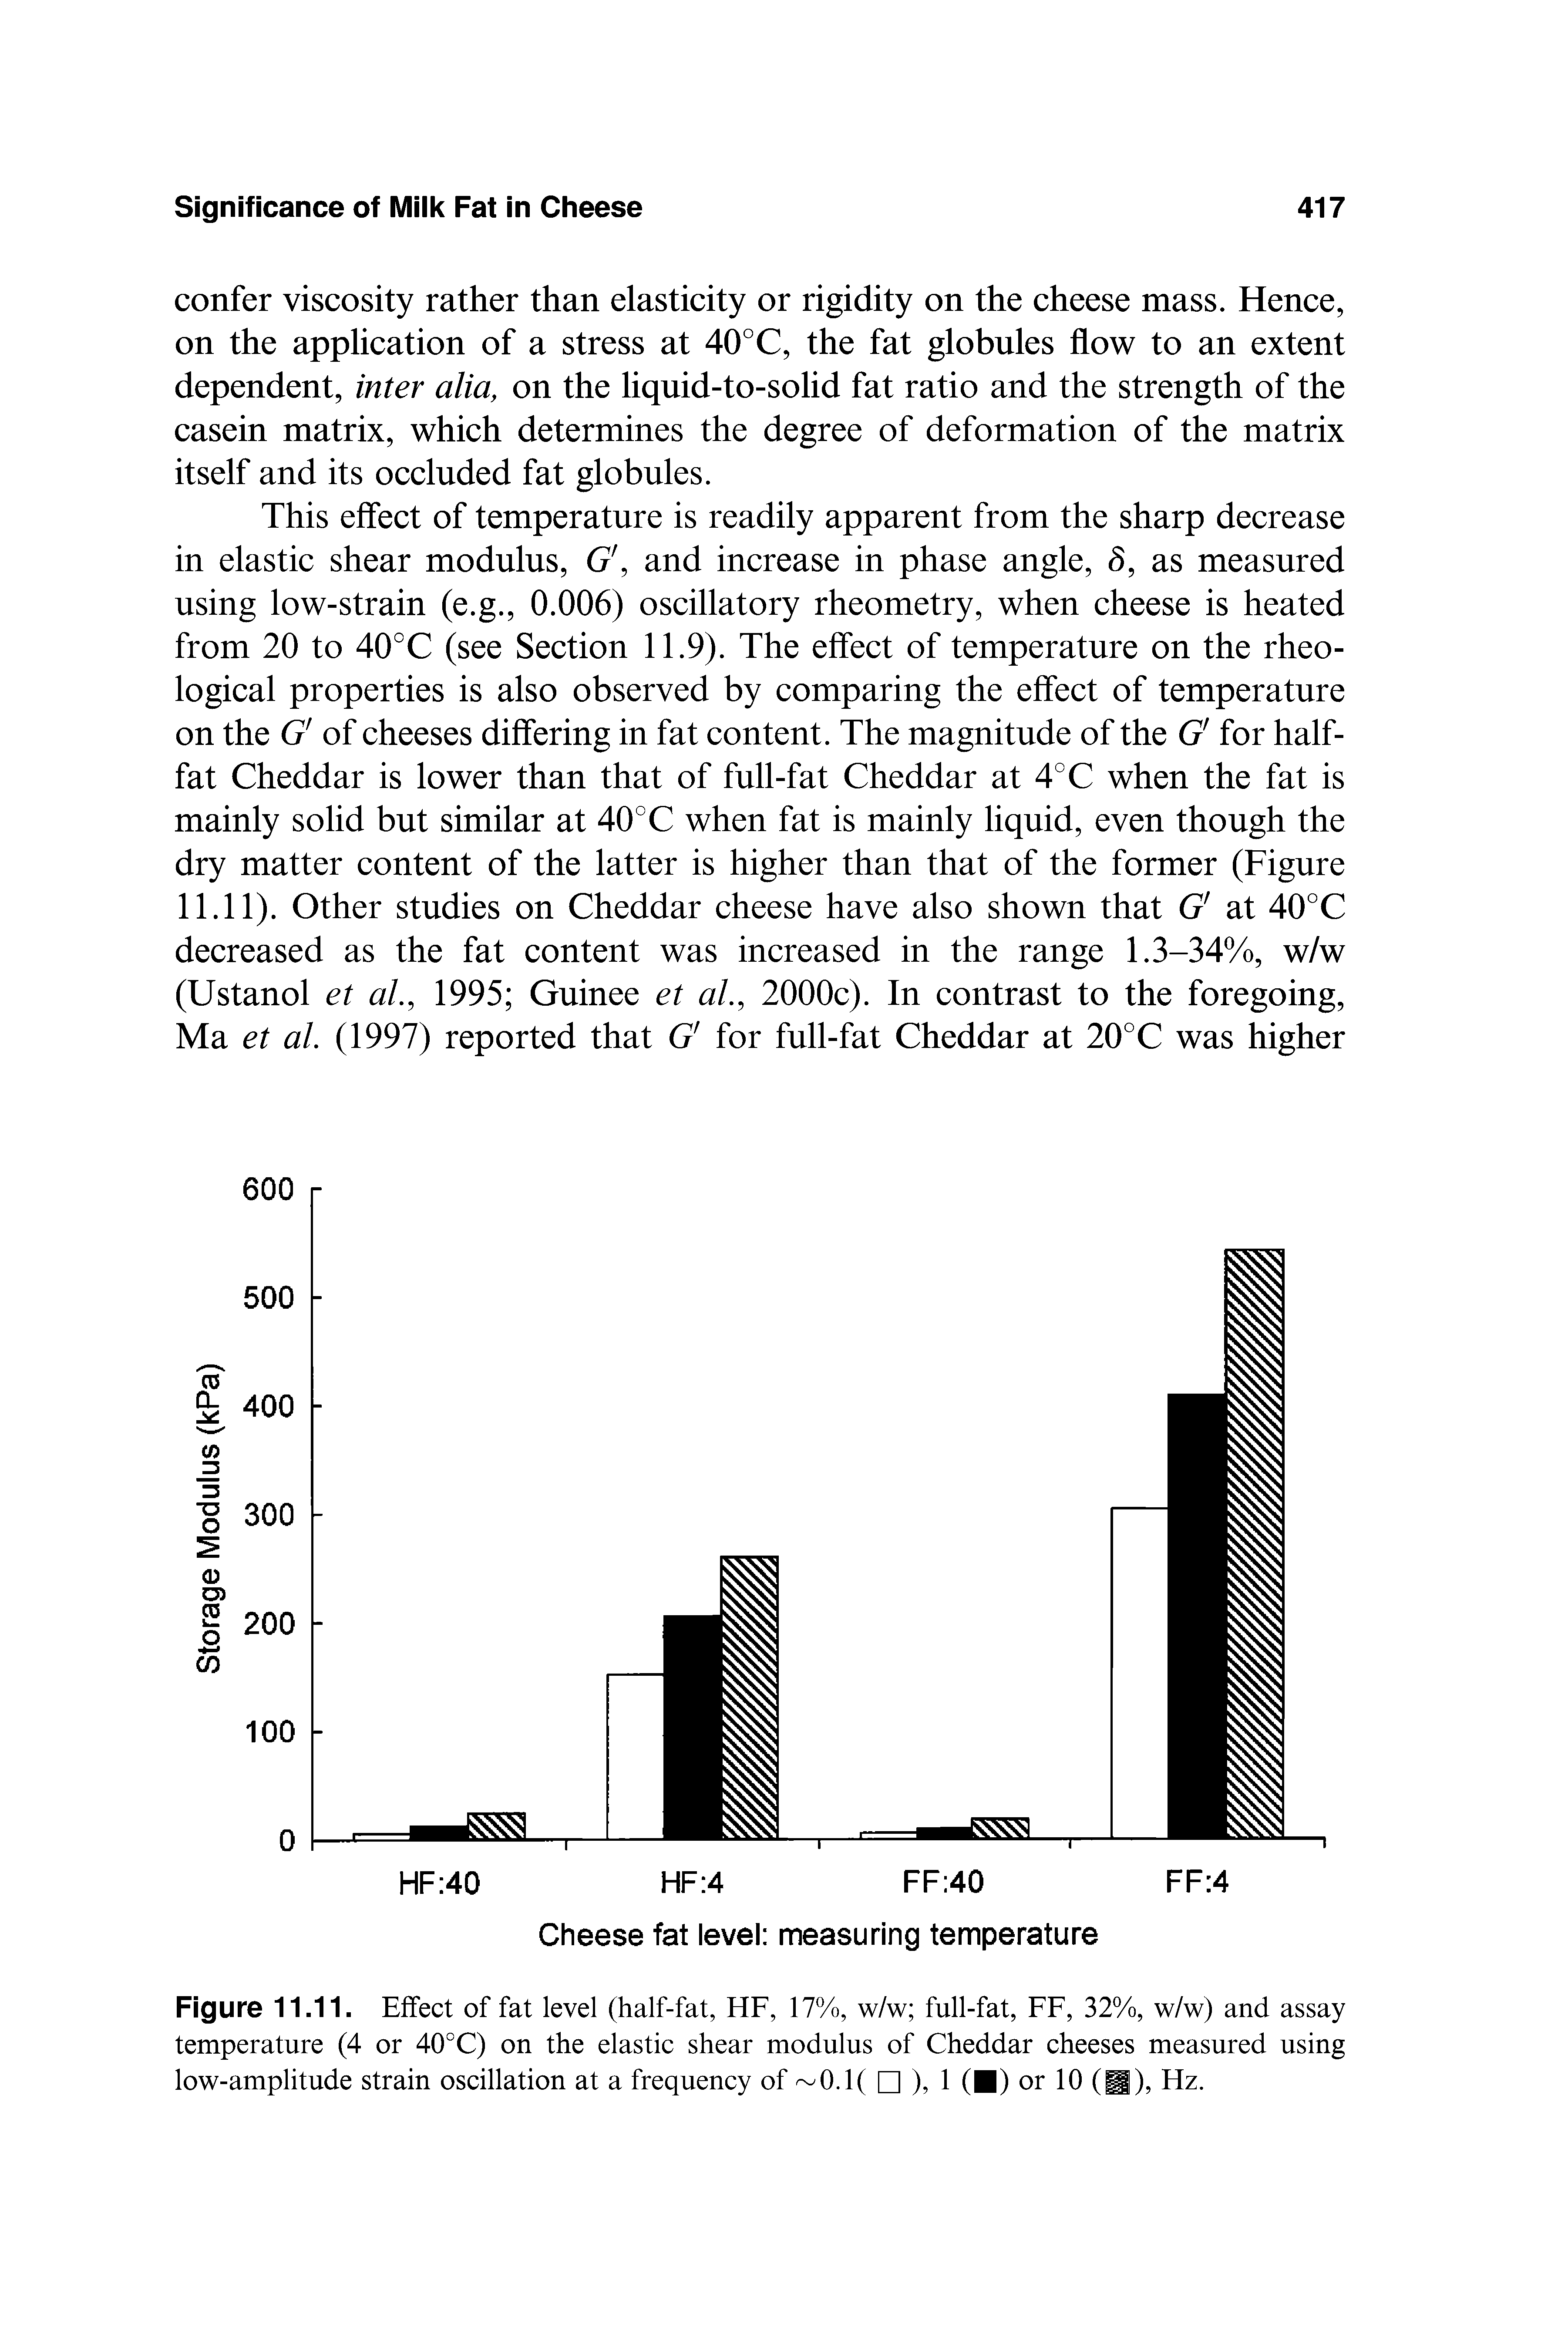 Figure 11.11. Effect of fat level (half-fat, HF, 17%, w/w full-fat, FF, 32%, w/w) and assay temperature (4 or 40°C) on the elastic shear modulus of Cheddar cheeses measured using low-amplitude strain oscillation at a frequency of 0.1( ), 1 ( ) or 10 (g), Hz.